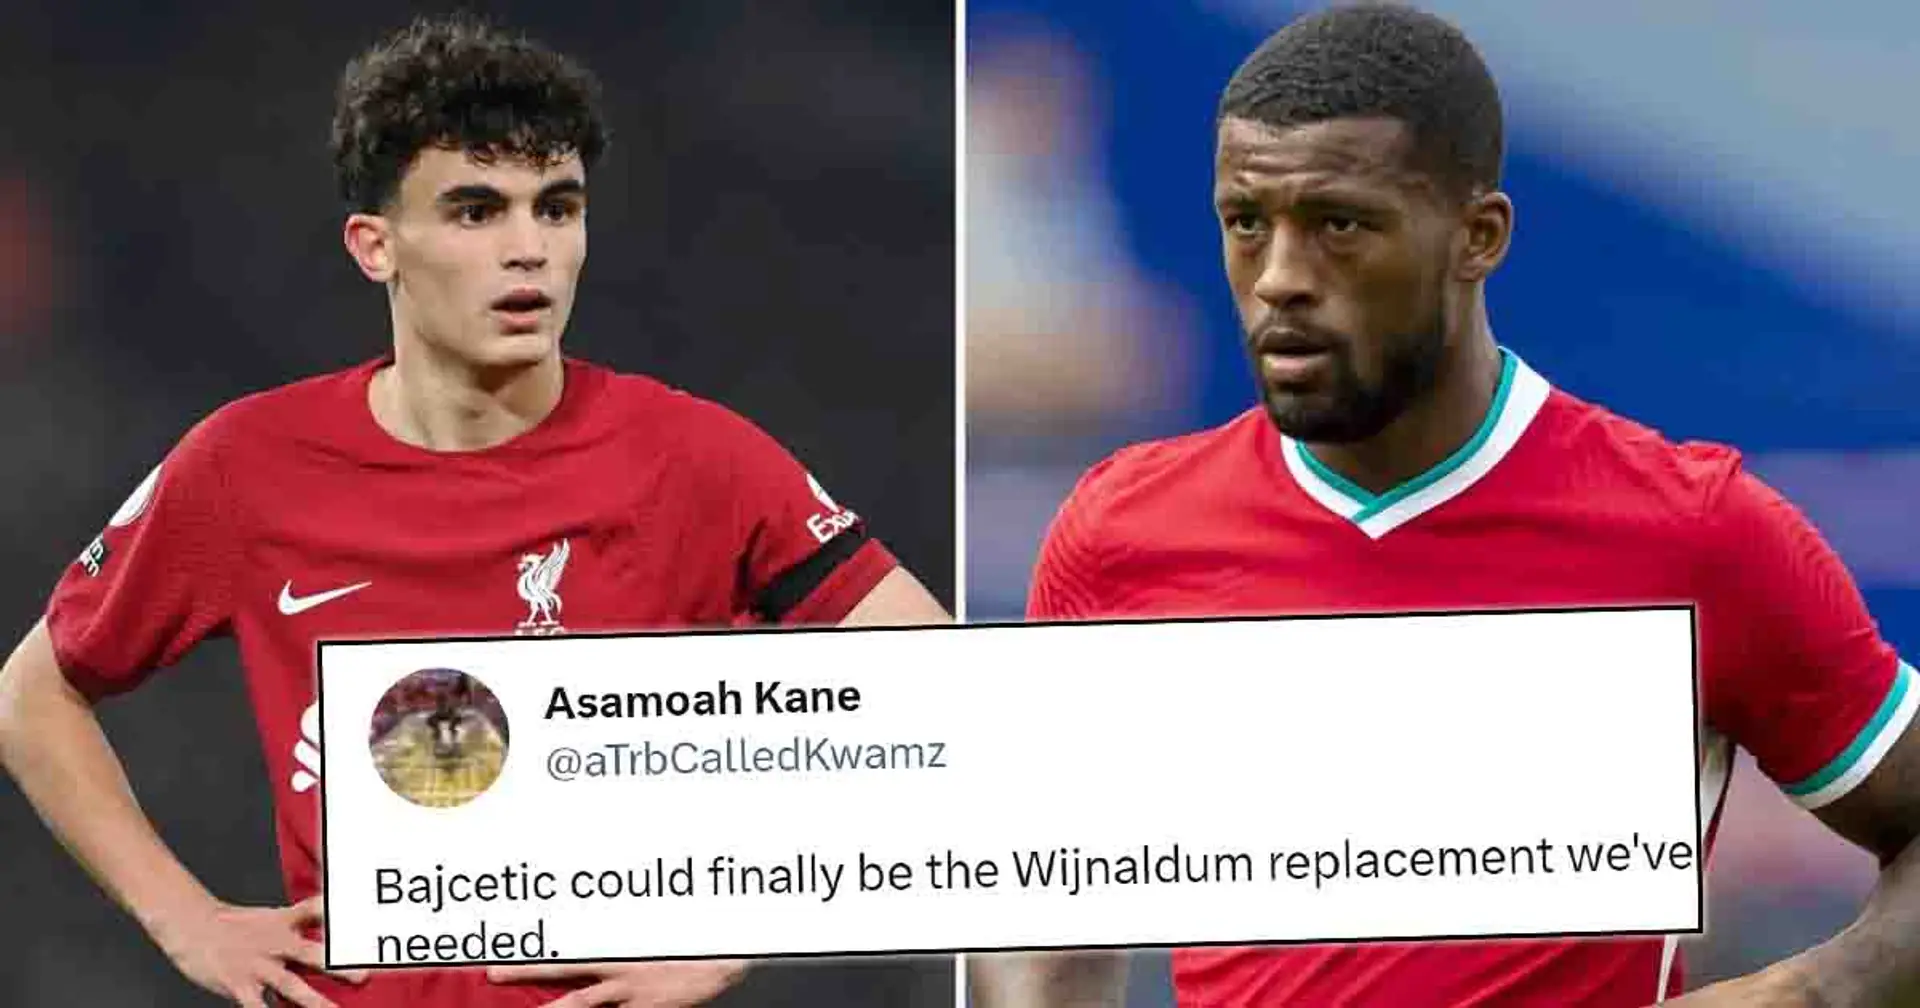 'Saw shades of 20-21 Wijnaldum': Some Liverpool fans compare Bajcetic with Gini after Everton heroics